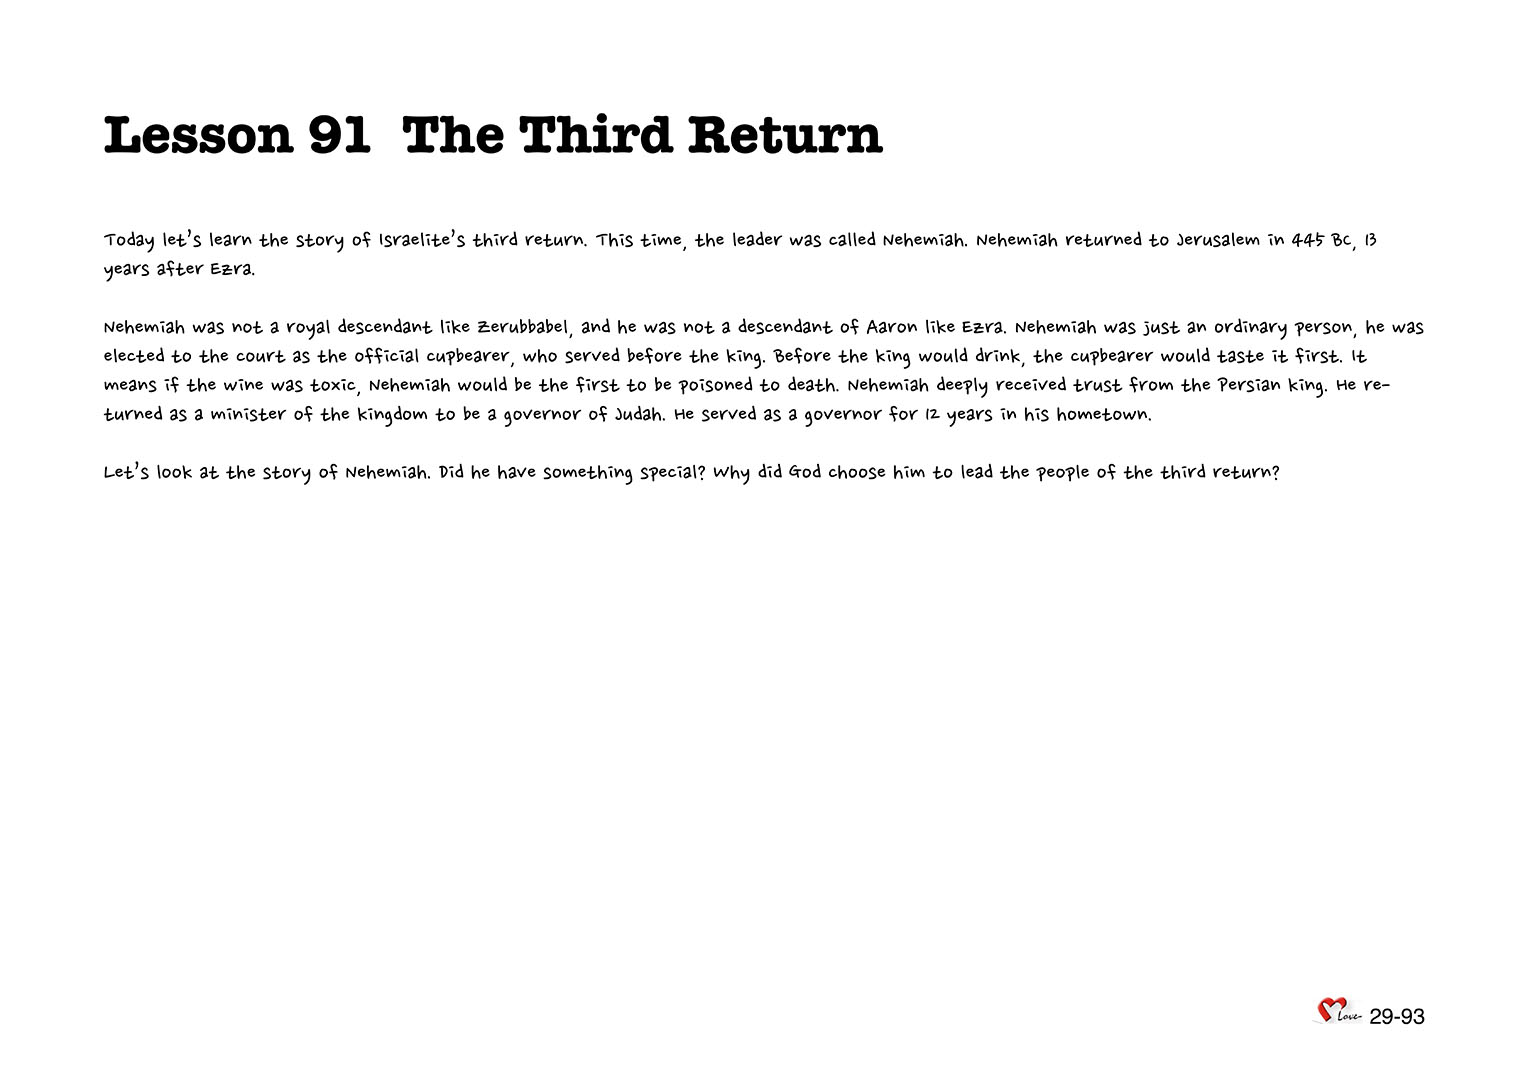 Chapter 29 - Lesson 93 - The Third Return